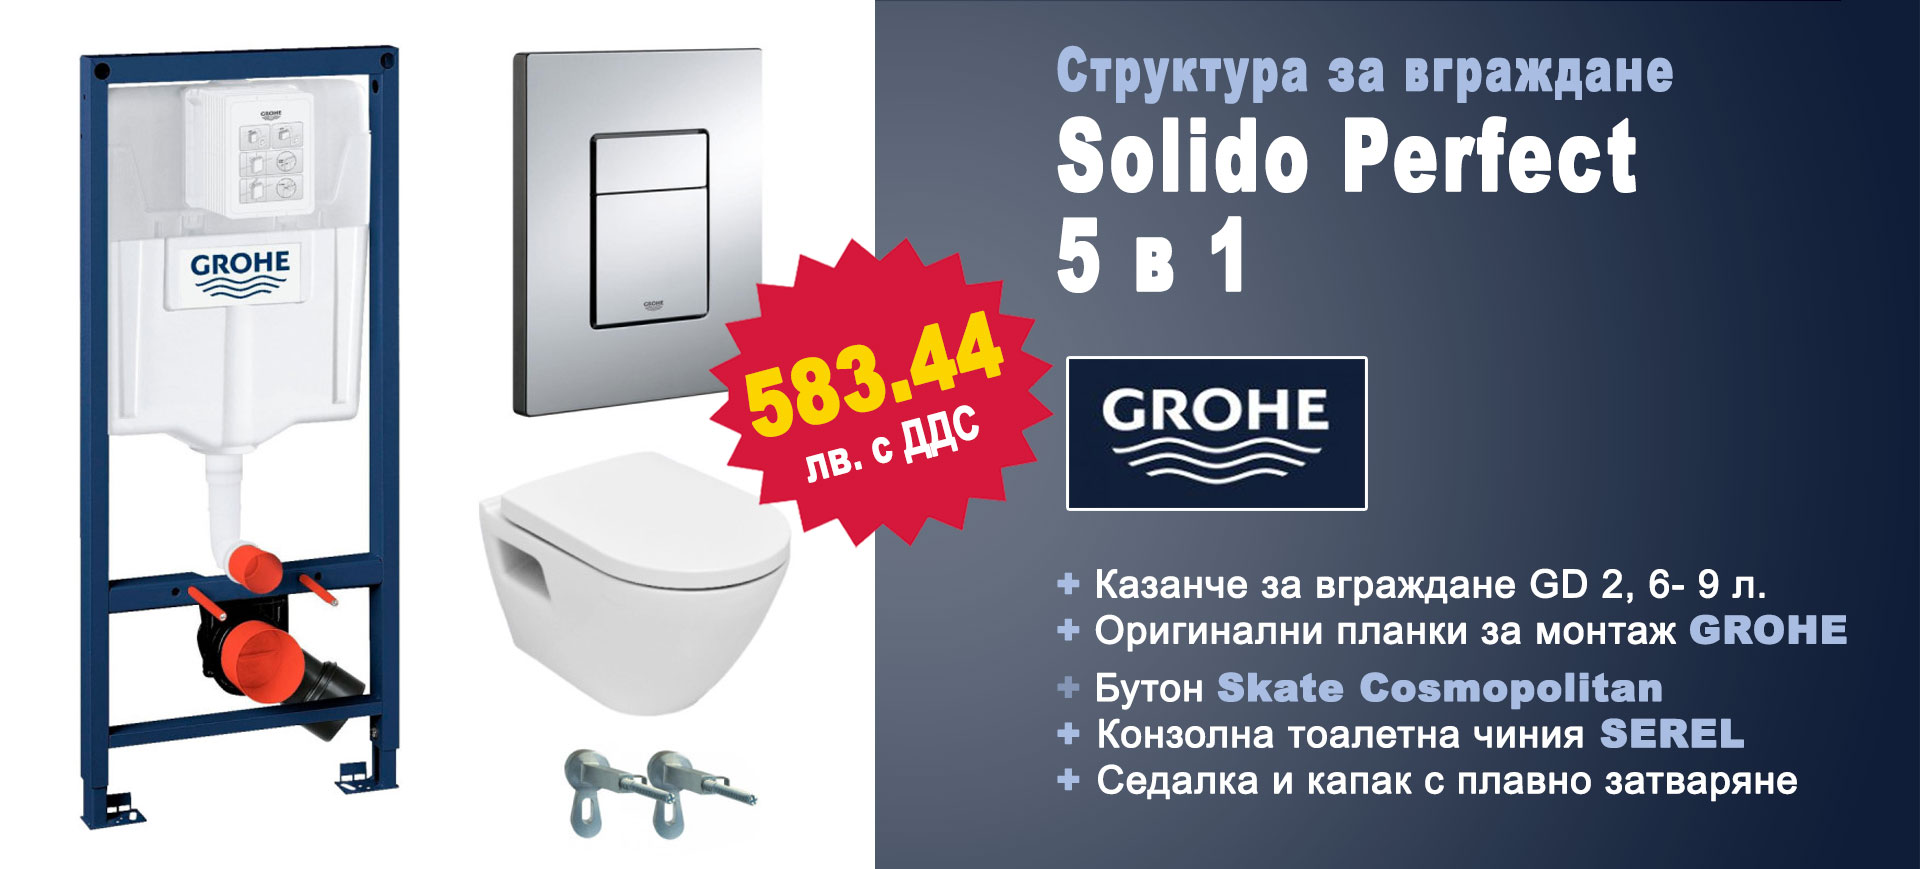 GROHE Solido Perfect 5 в 1 built-in set at a special price